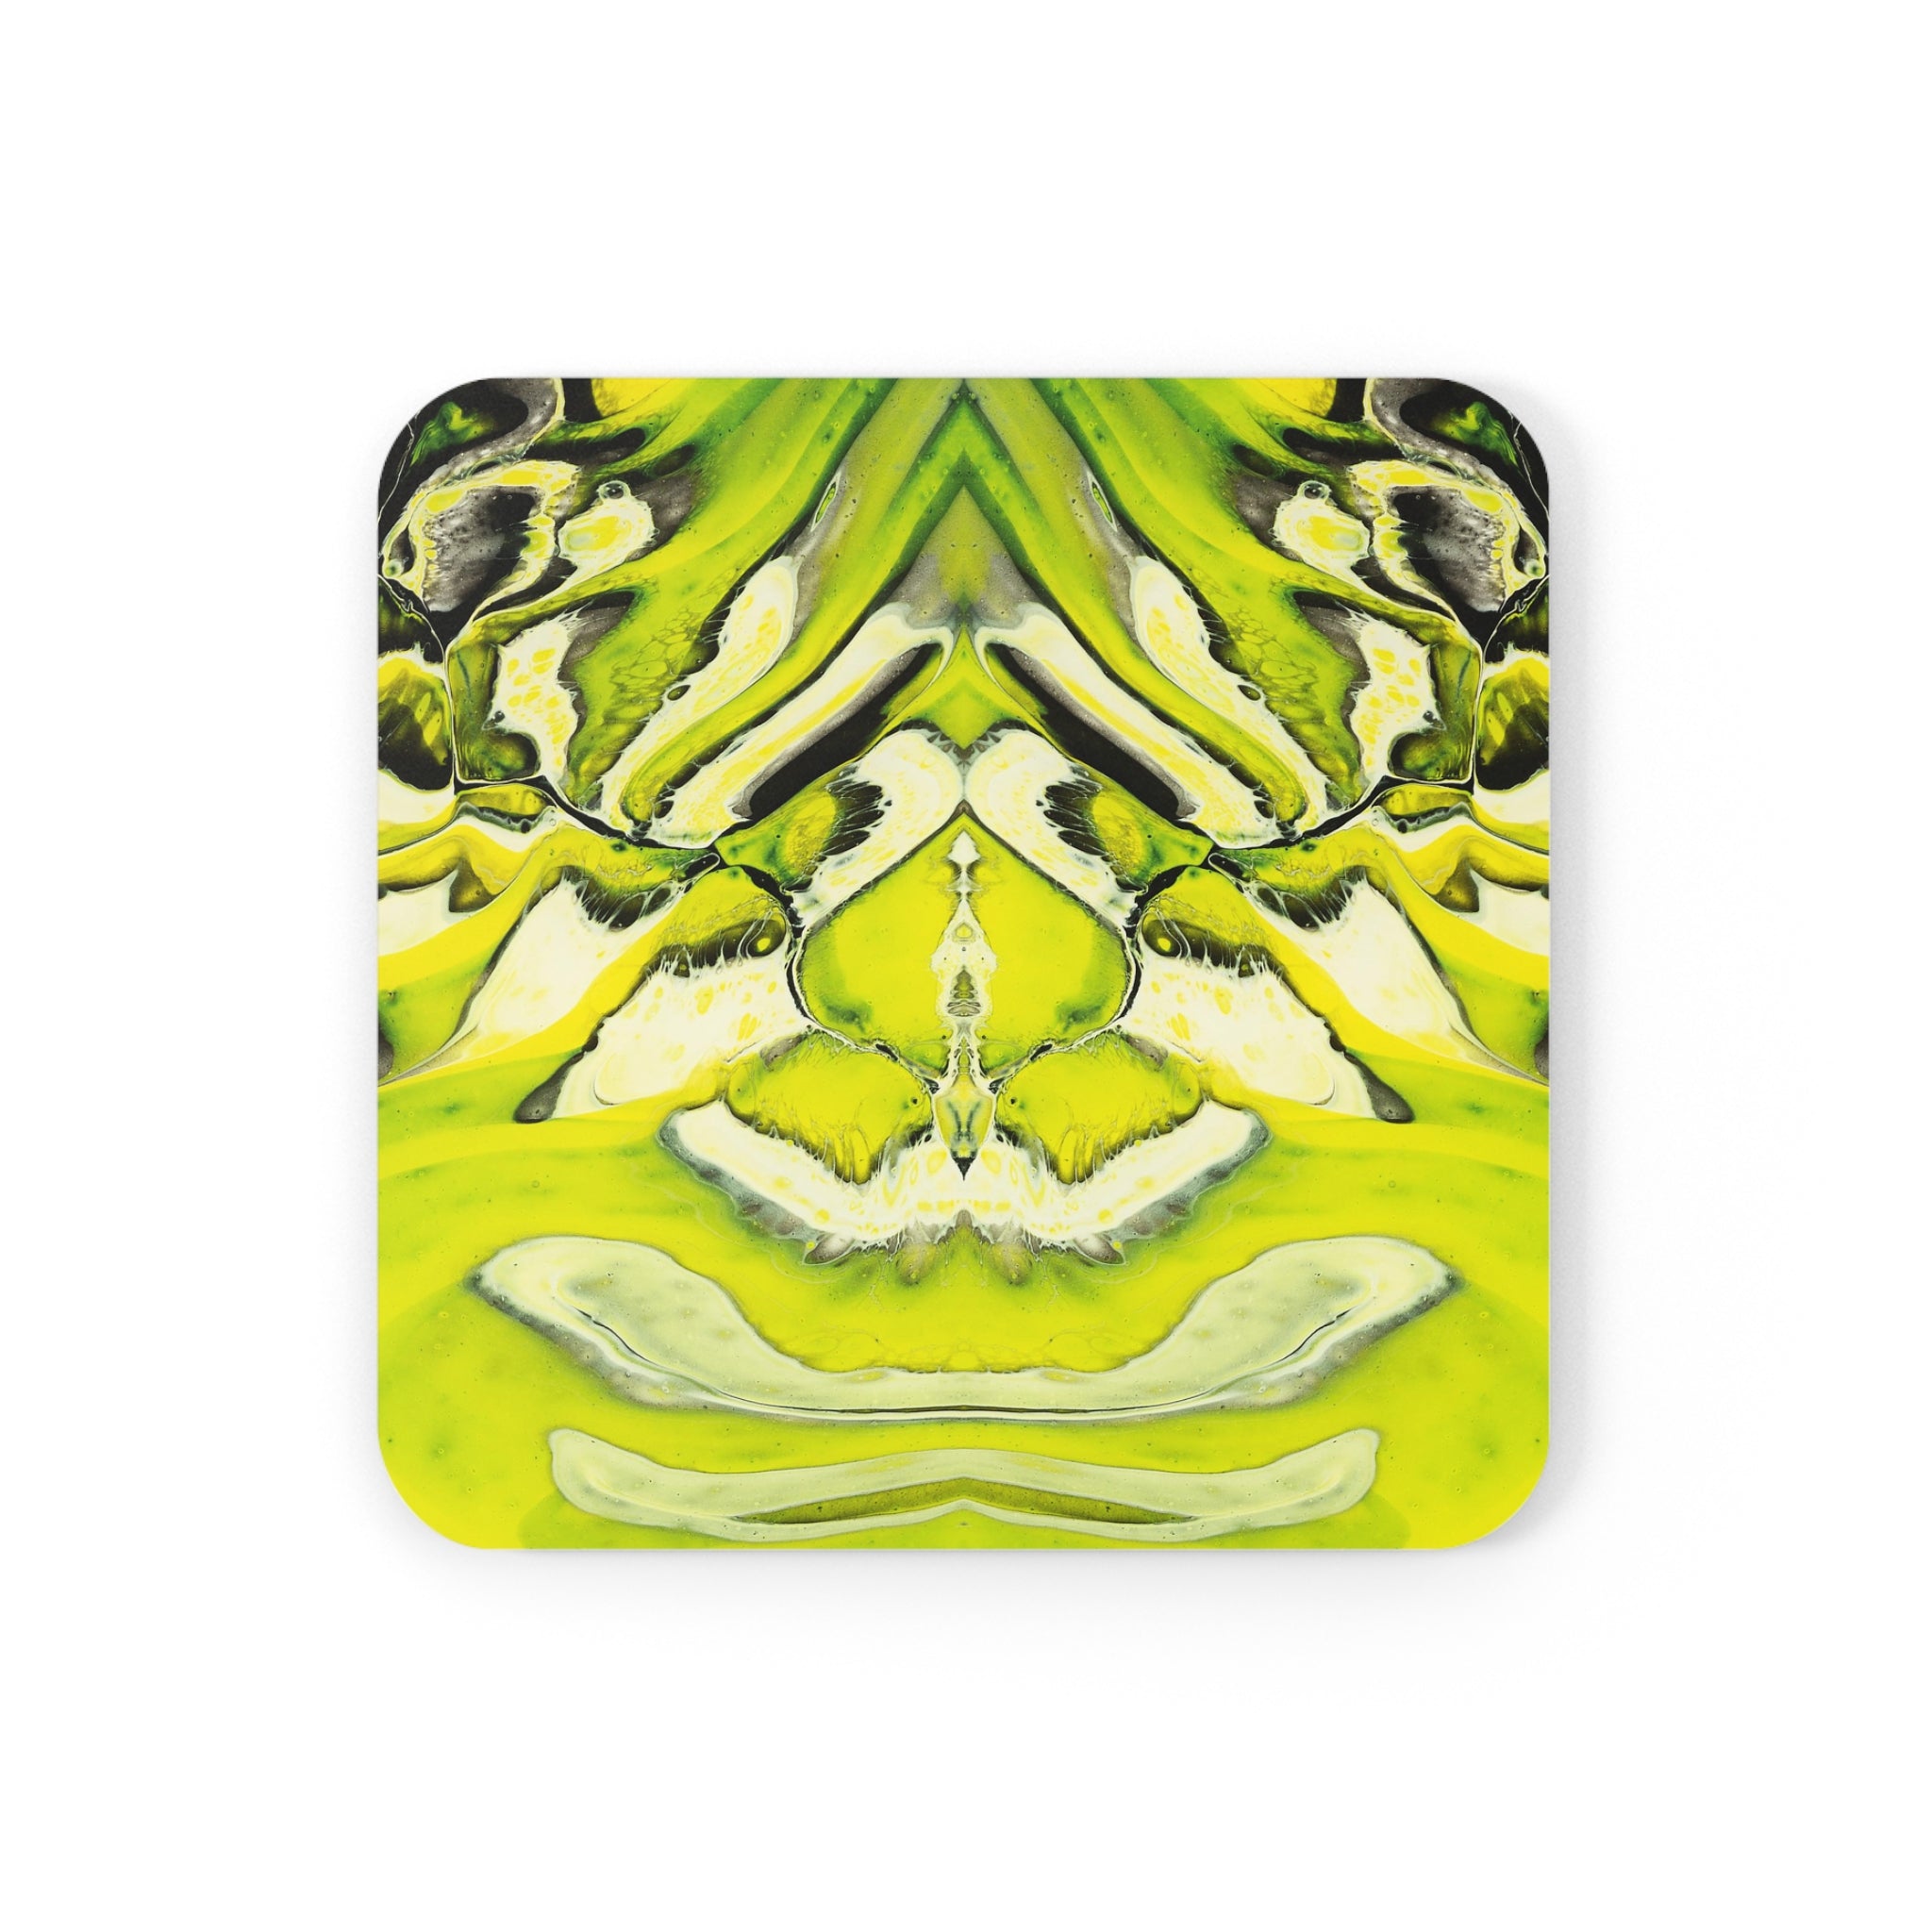 Cameron Creations - Running Wild - Stylish Coffee Coaster - Square Front